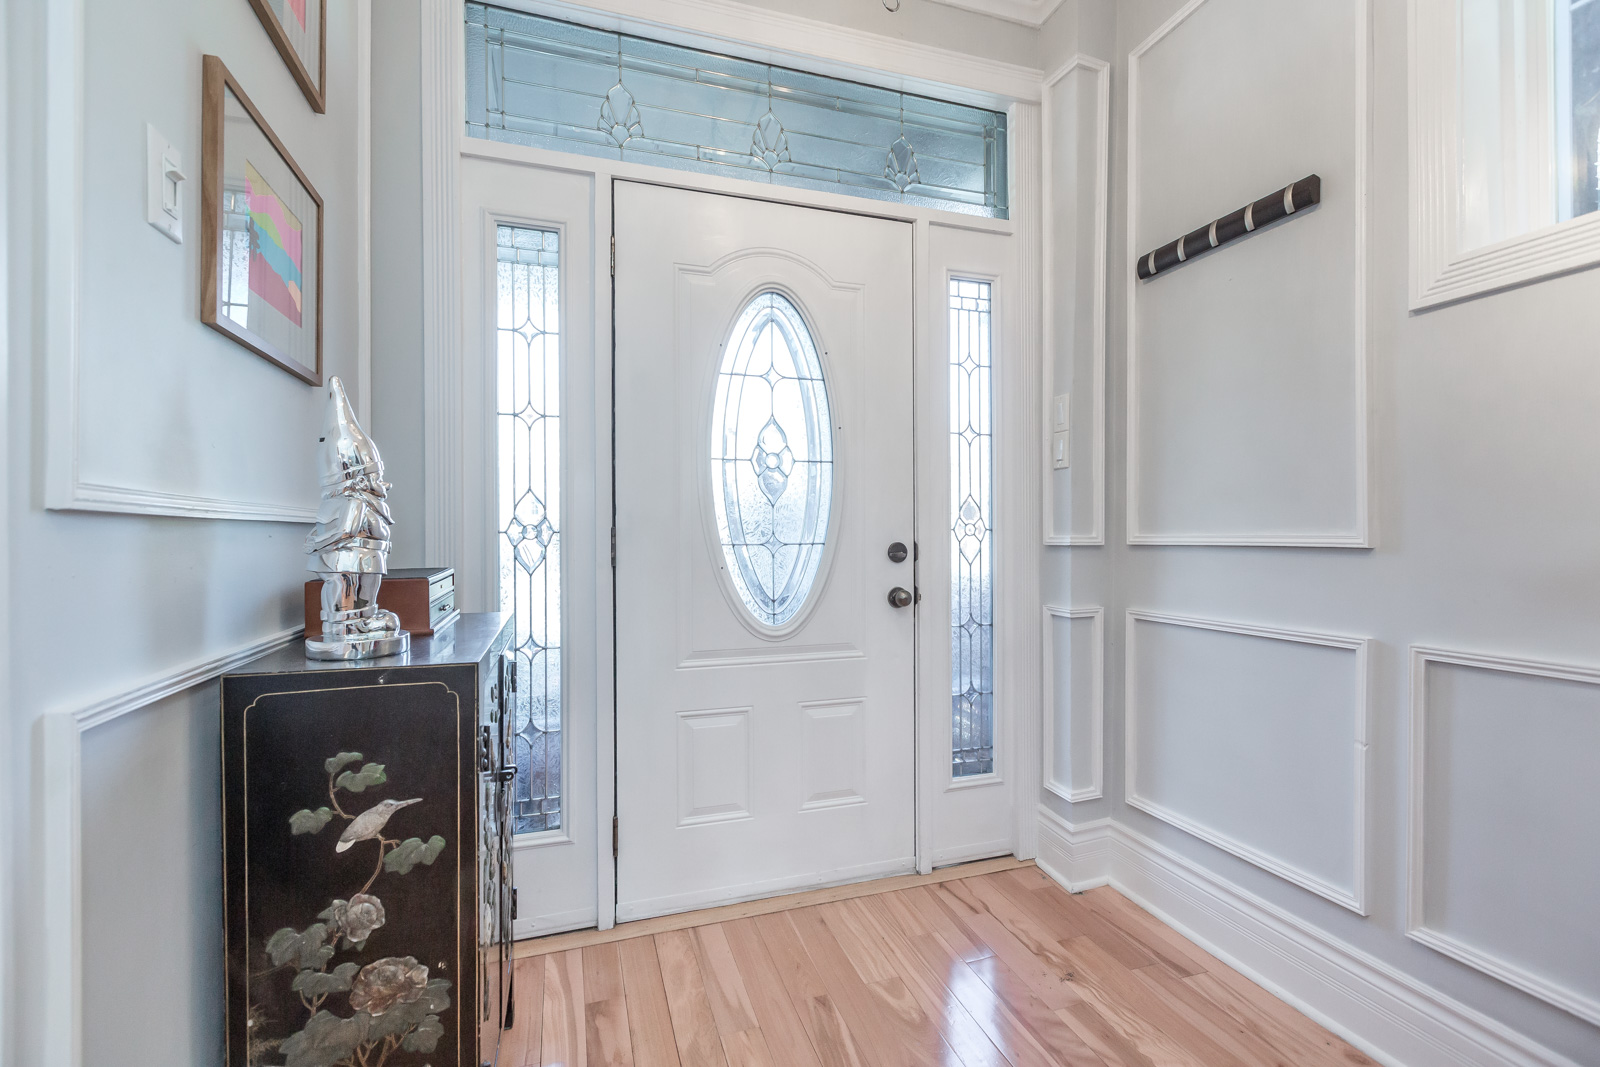 Entry way with beautiful mouldings